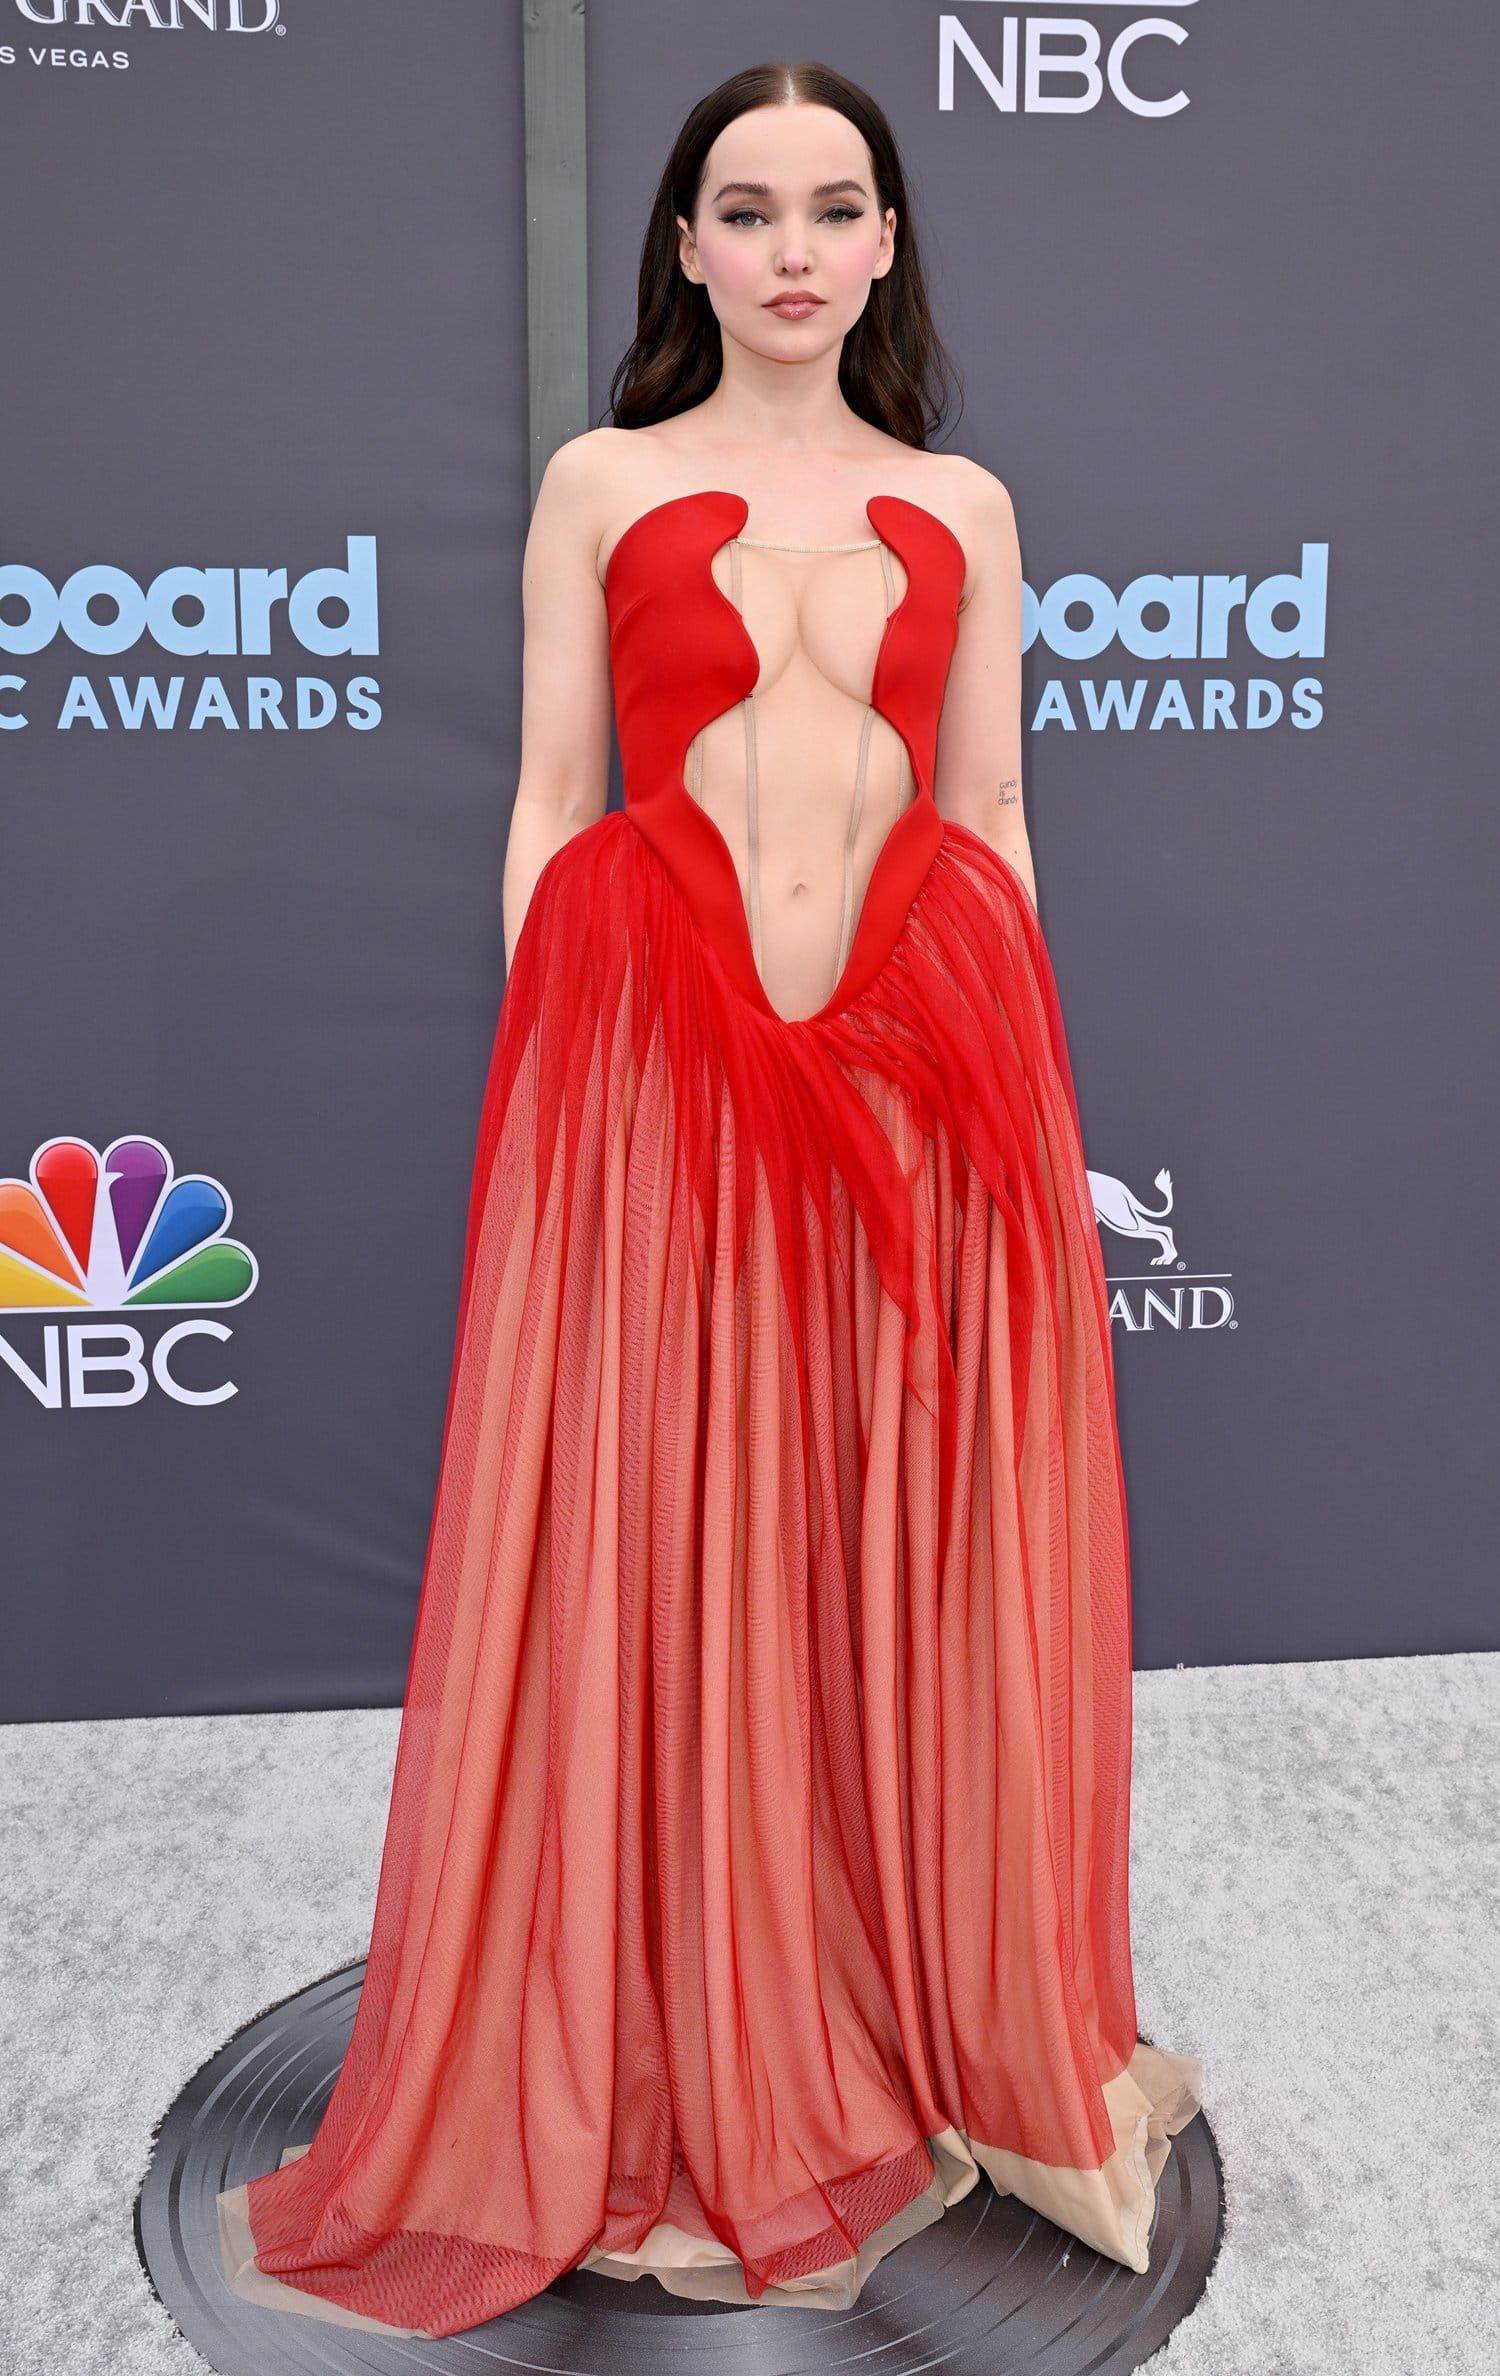 Dove Cameron flaunts her boobs in an Ashlyn gown at the 2022 Billboard Music Awards